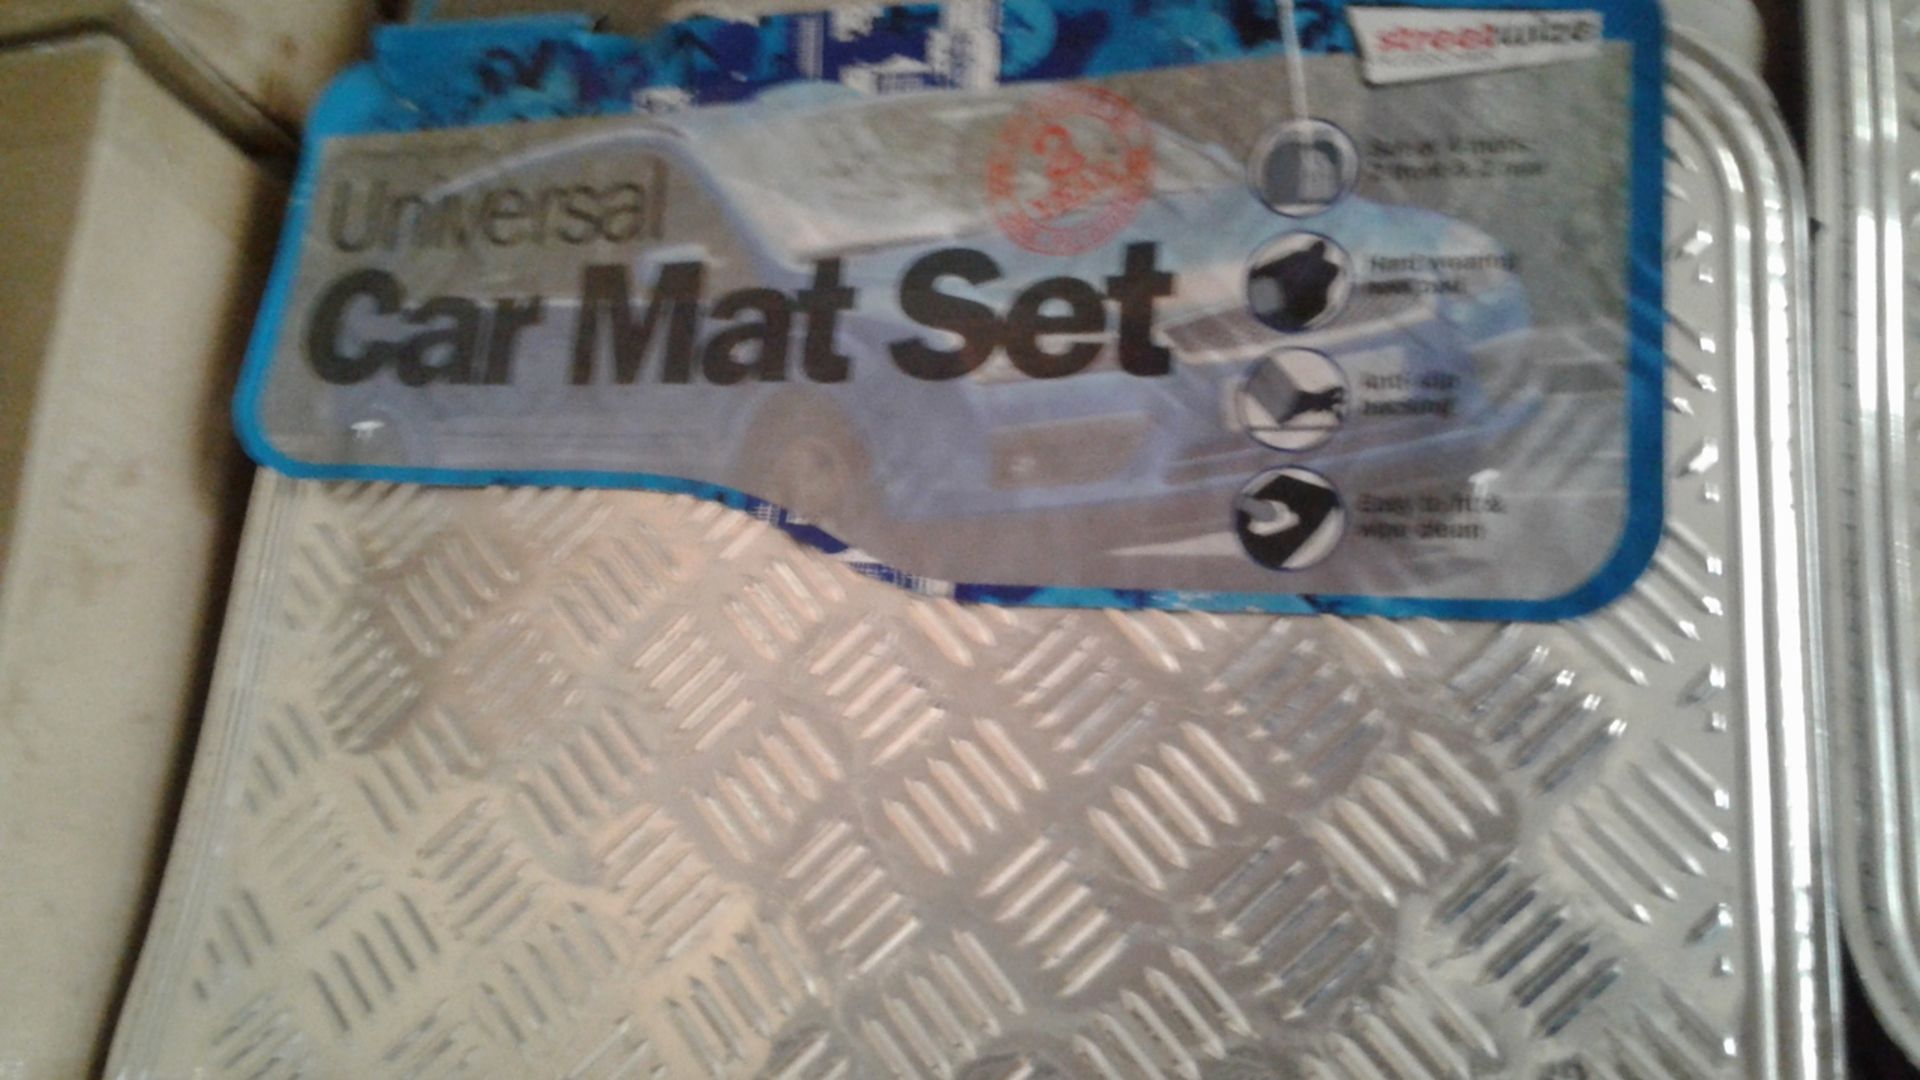 6 x sets - Chrome Silver checker Full mat set - 2 front & 2 back per set new & unused - rrp £12.99 - Image 3 of 5